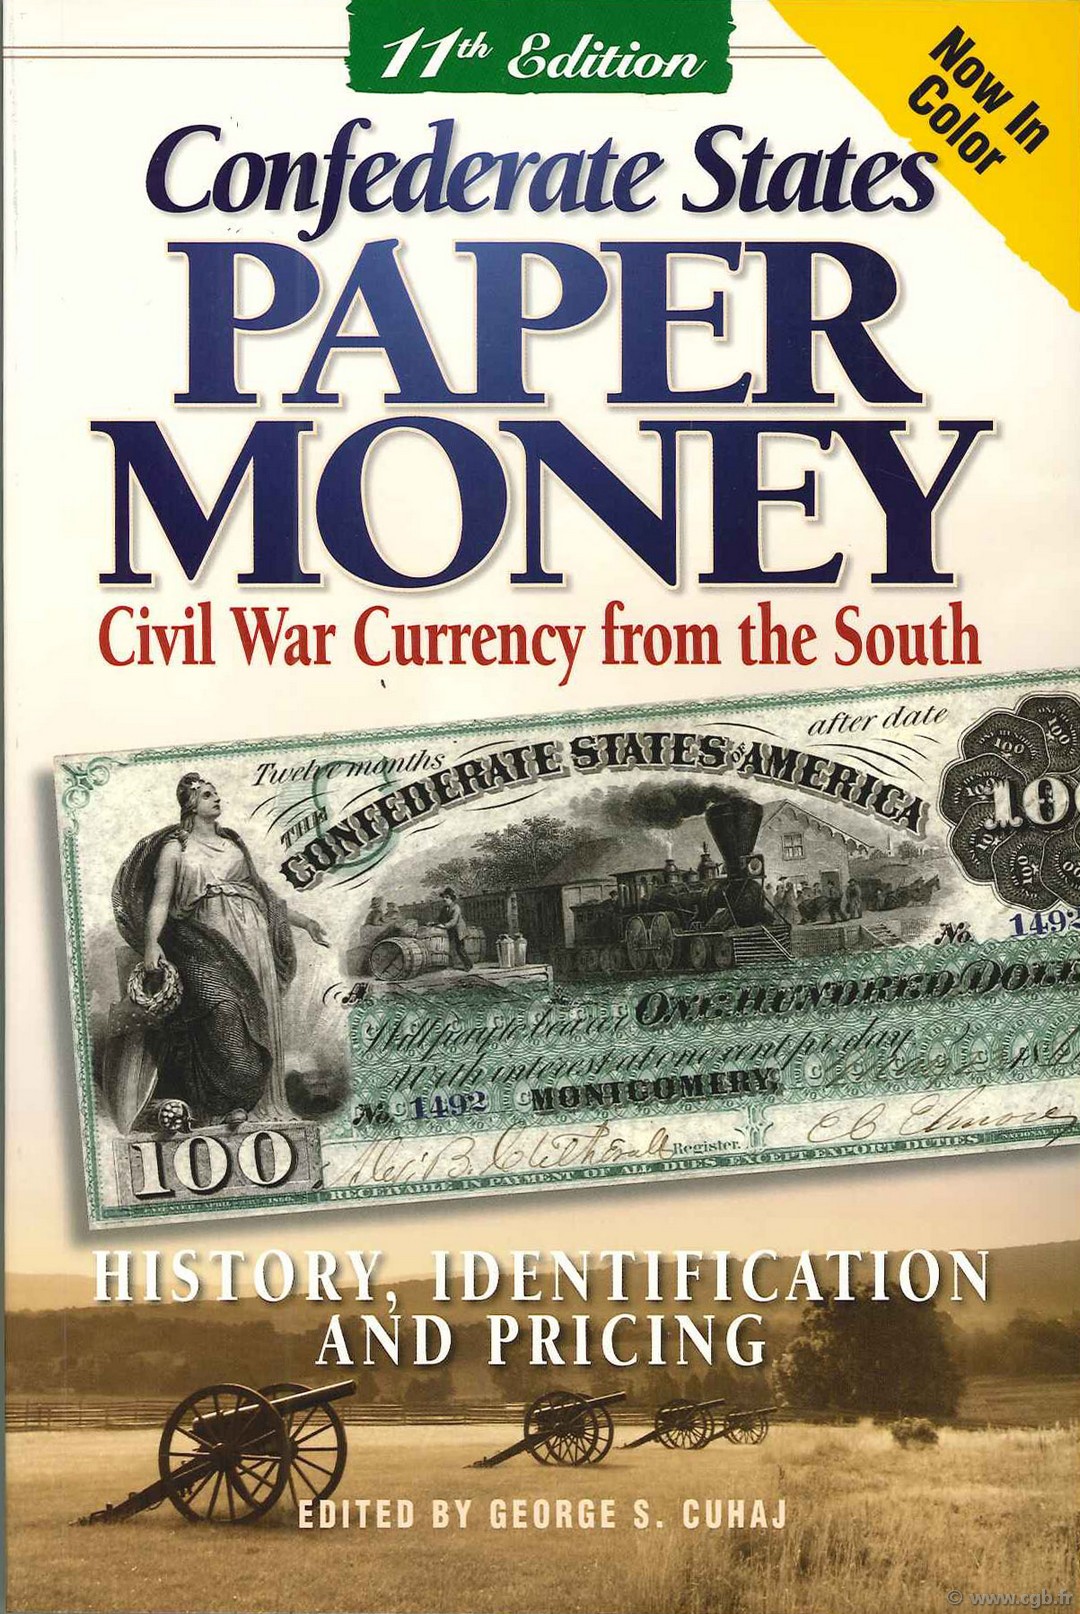 Confederate states paper money : Civil War Currency from the South 11th edition SLABAUGH Arlie R., CUHAJ George S.